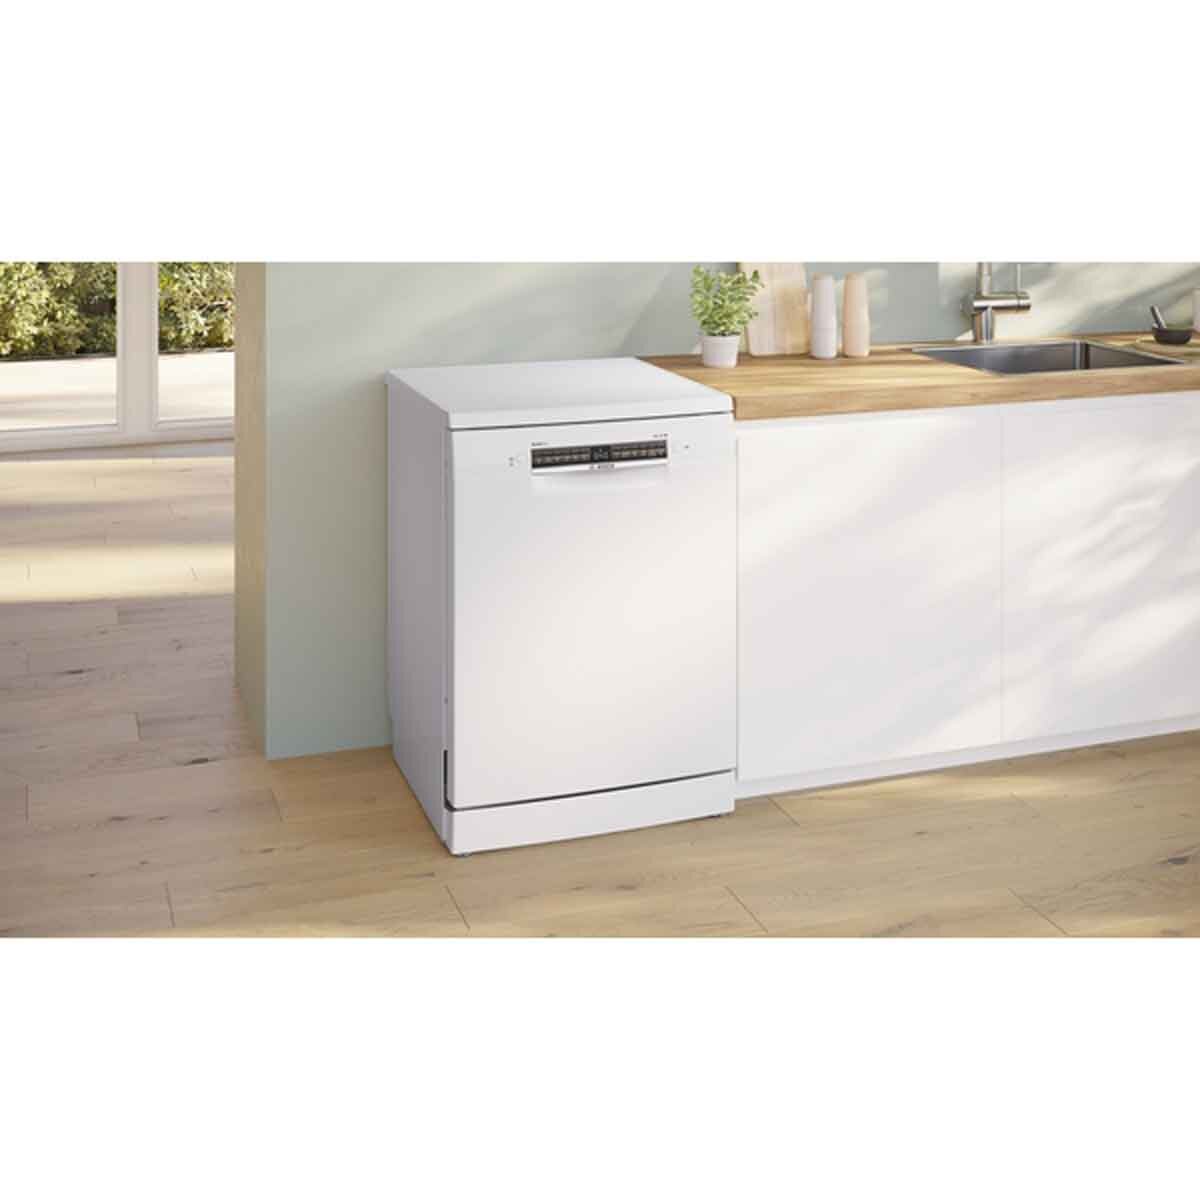 Buy Bosch SMS6ZCW10G Series 6 Freestanding 14 Place Setting Dishwasher, B Rated in White at Costco.co.uk